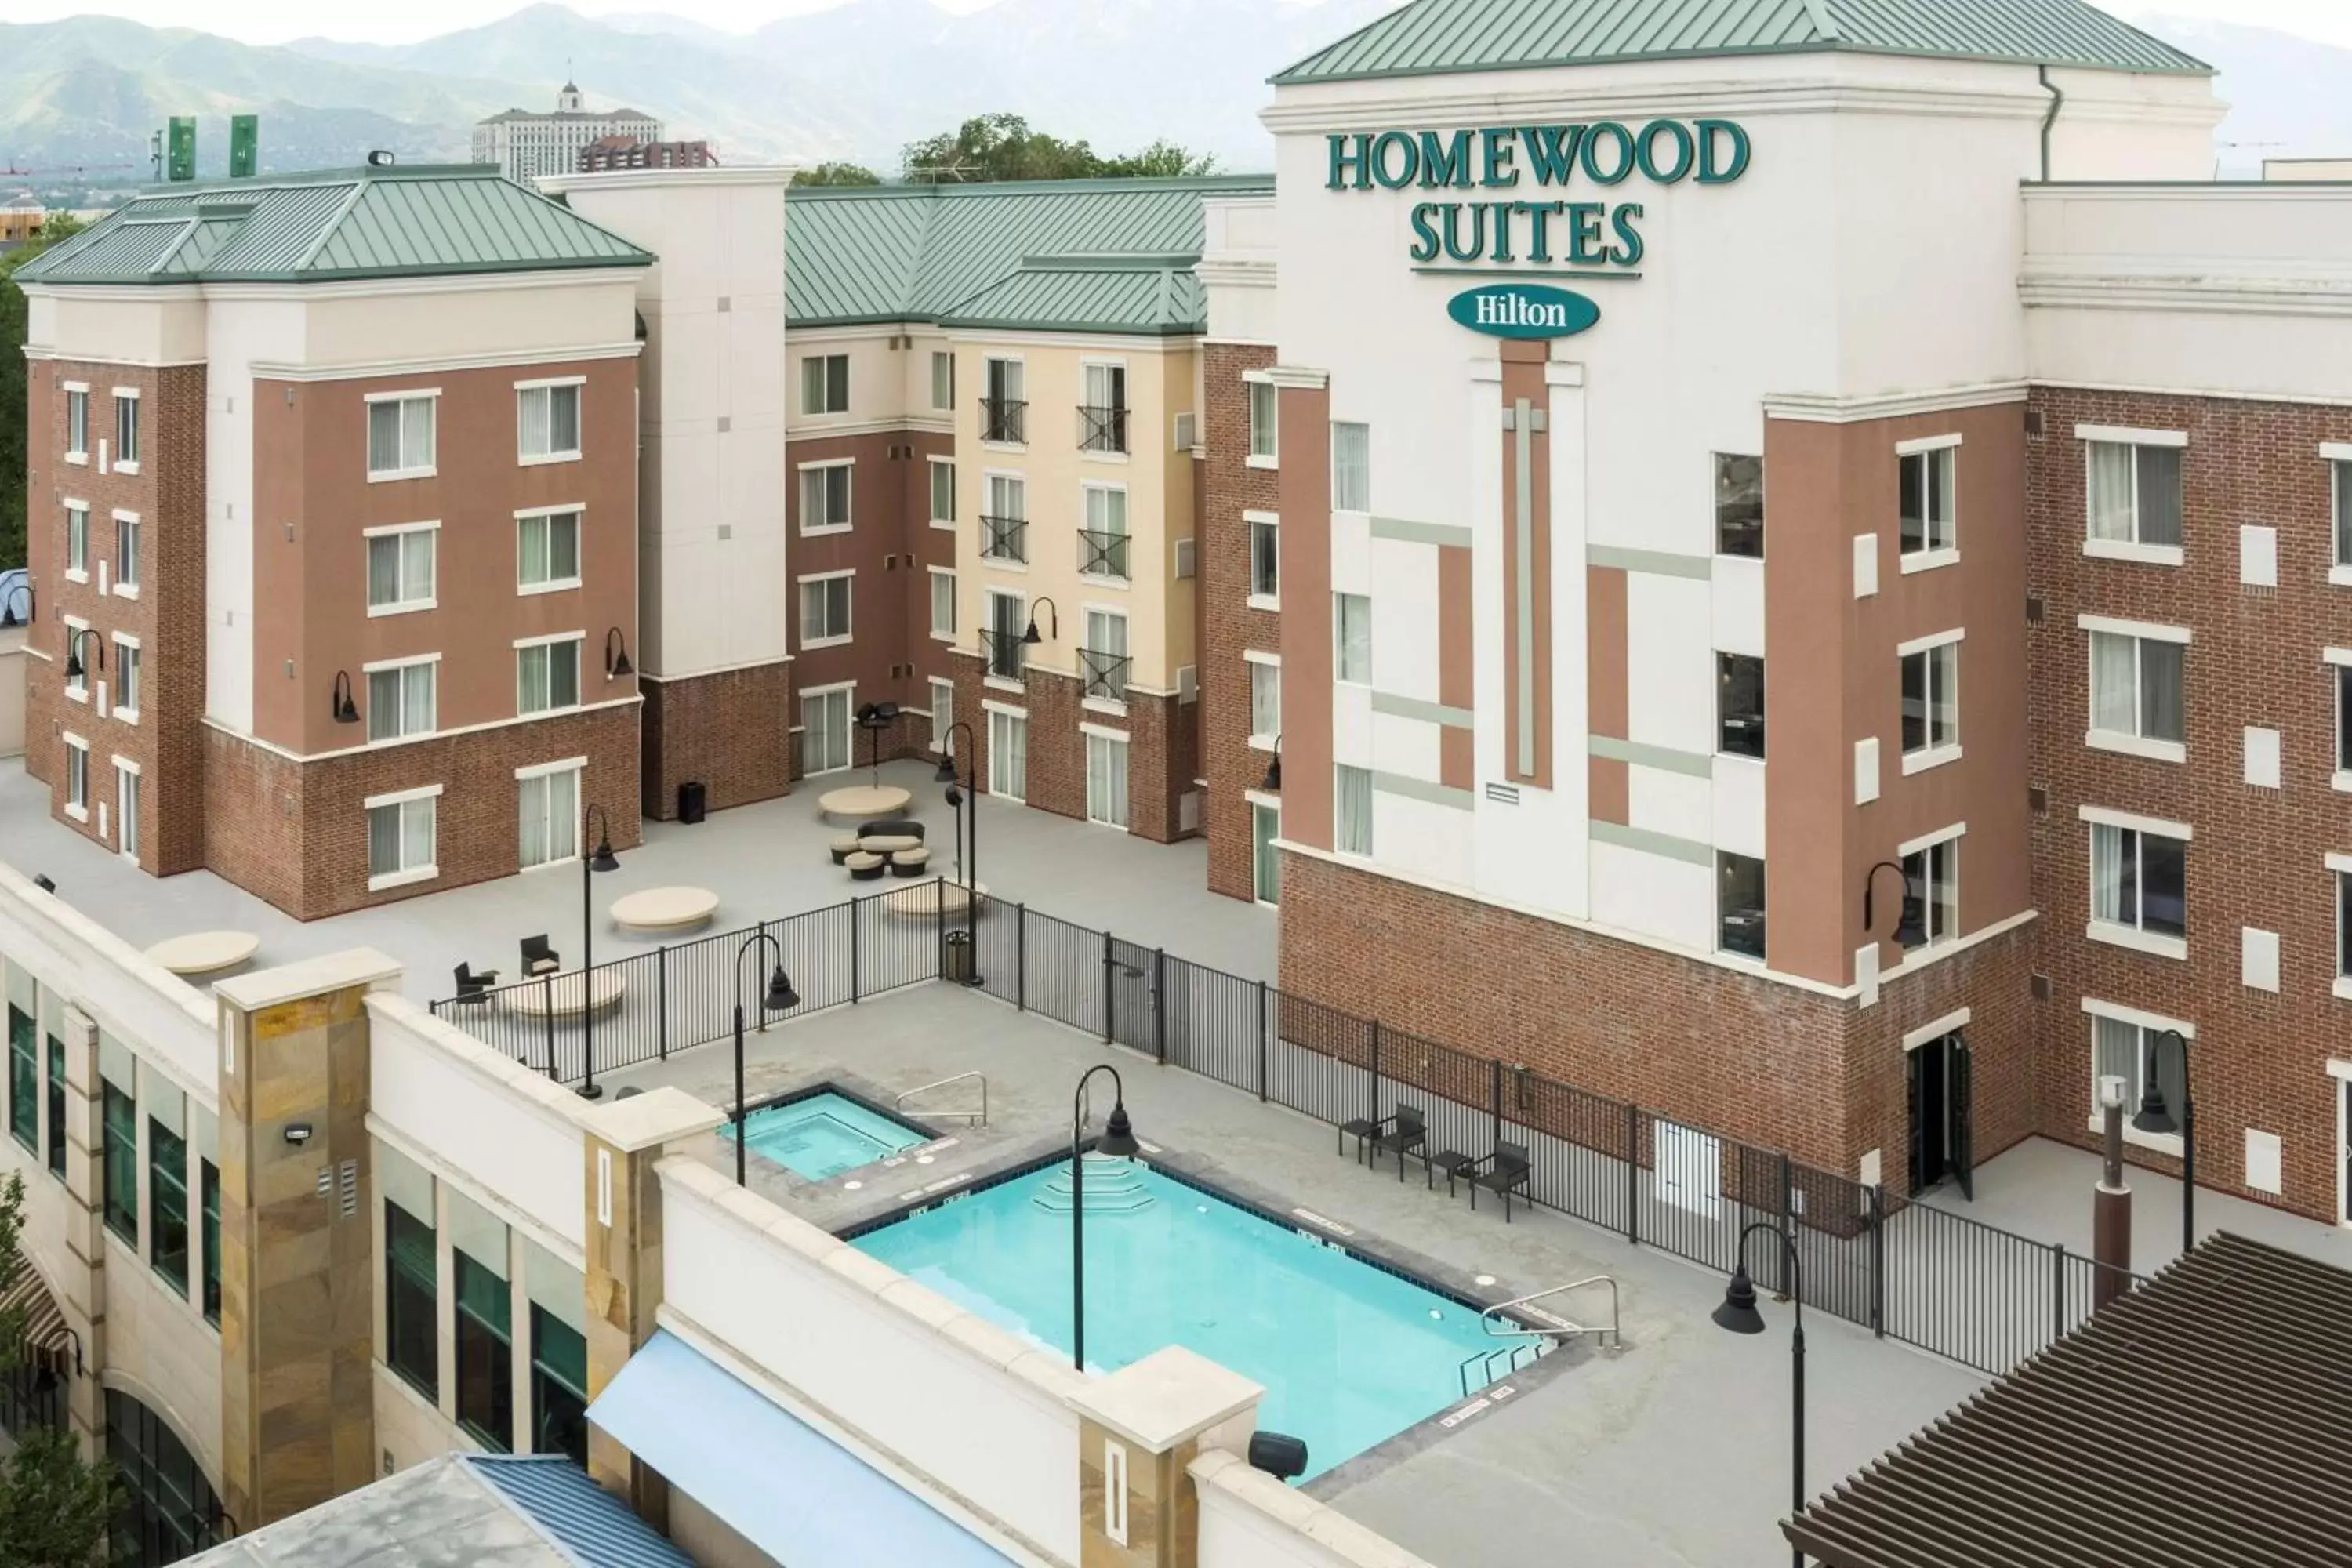 Property building, Pool View in Homewood Suites by Hilton Salt Lake City Downtown